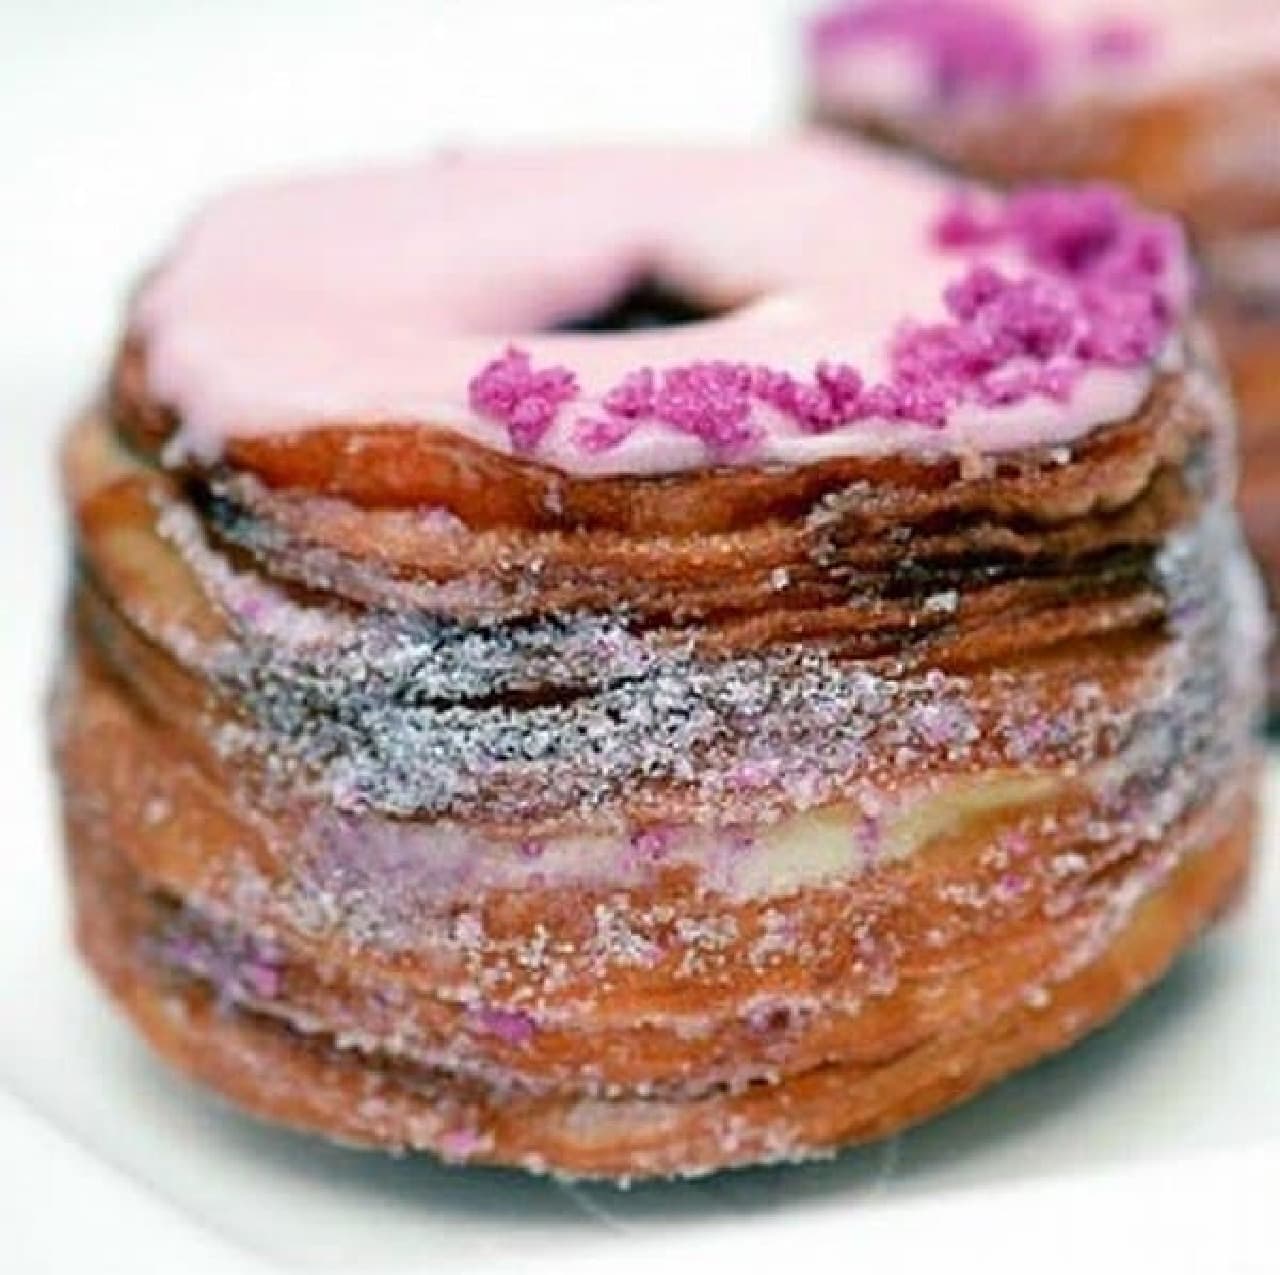 "Cronut" developed by New York bakery "Dominique Ansel"